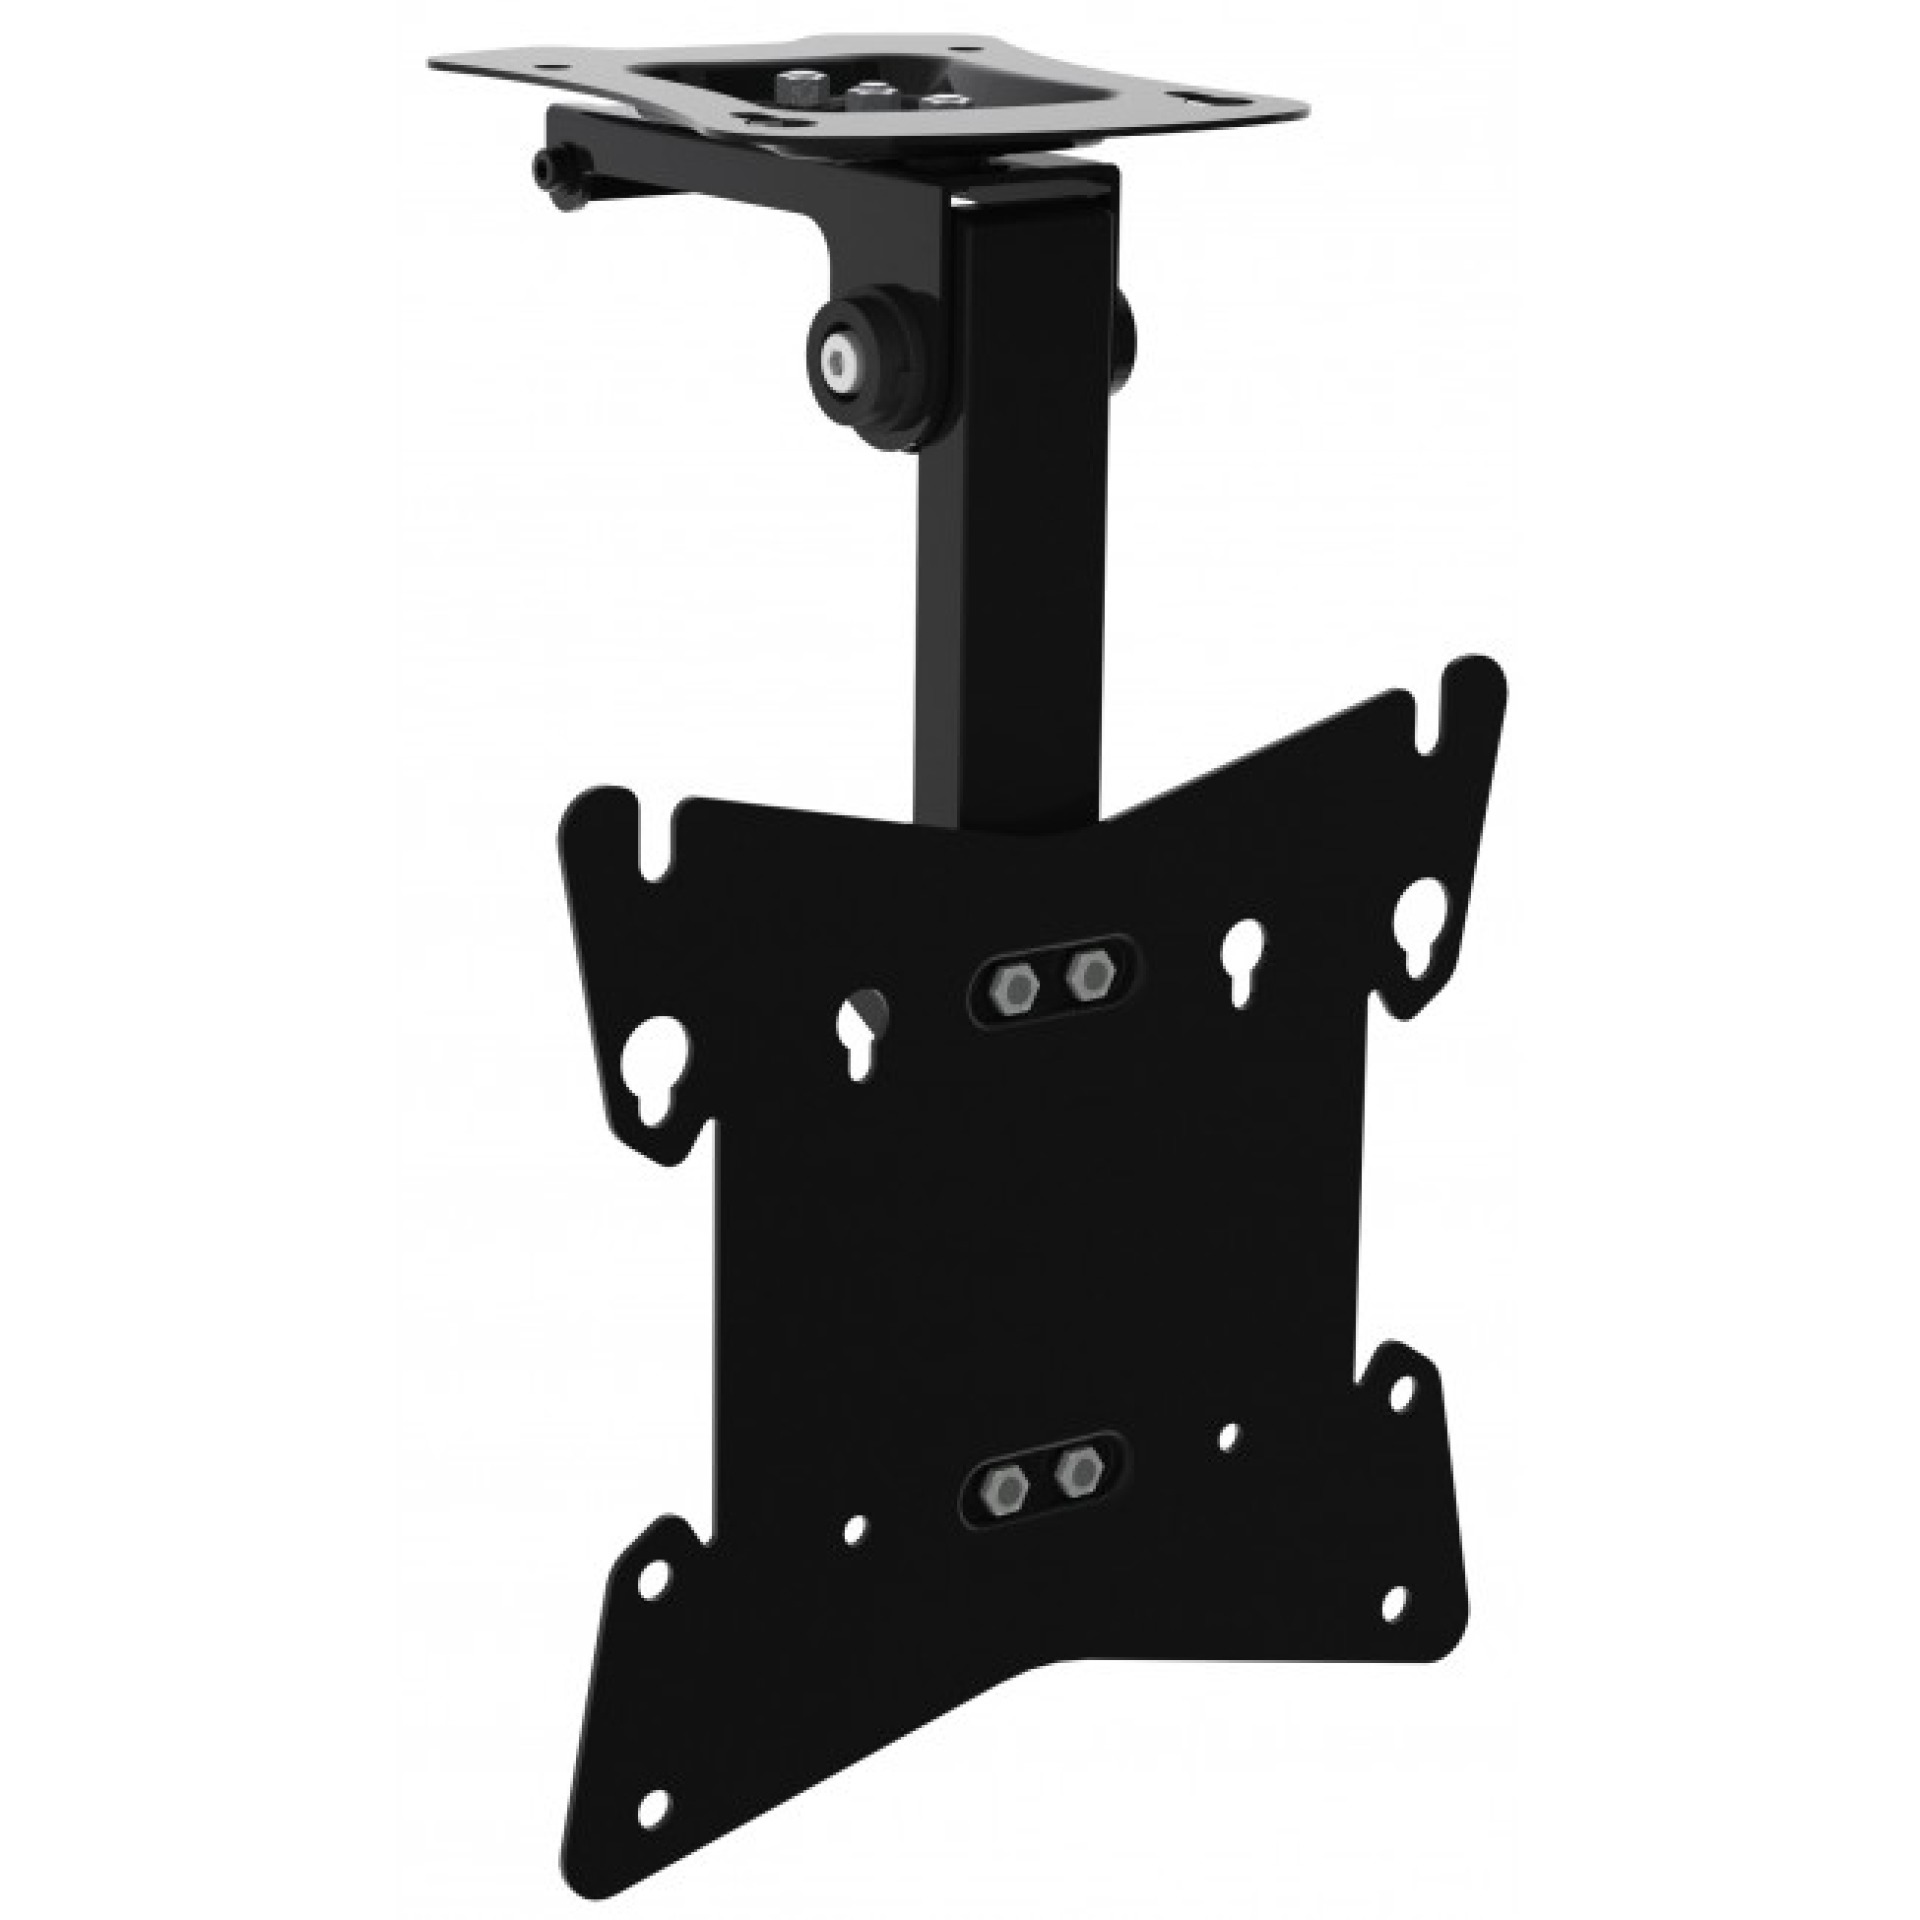 Fold-up TV Ceiling Mount for TV LED LCD 17-37"